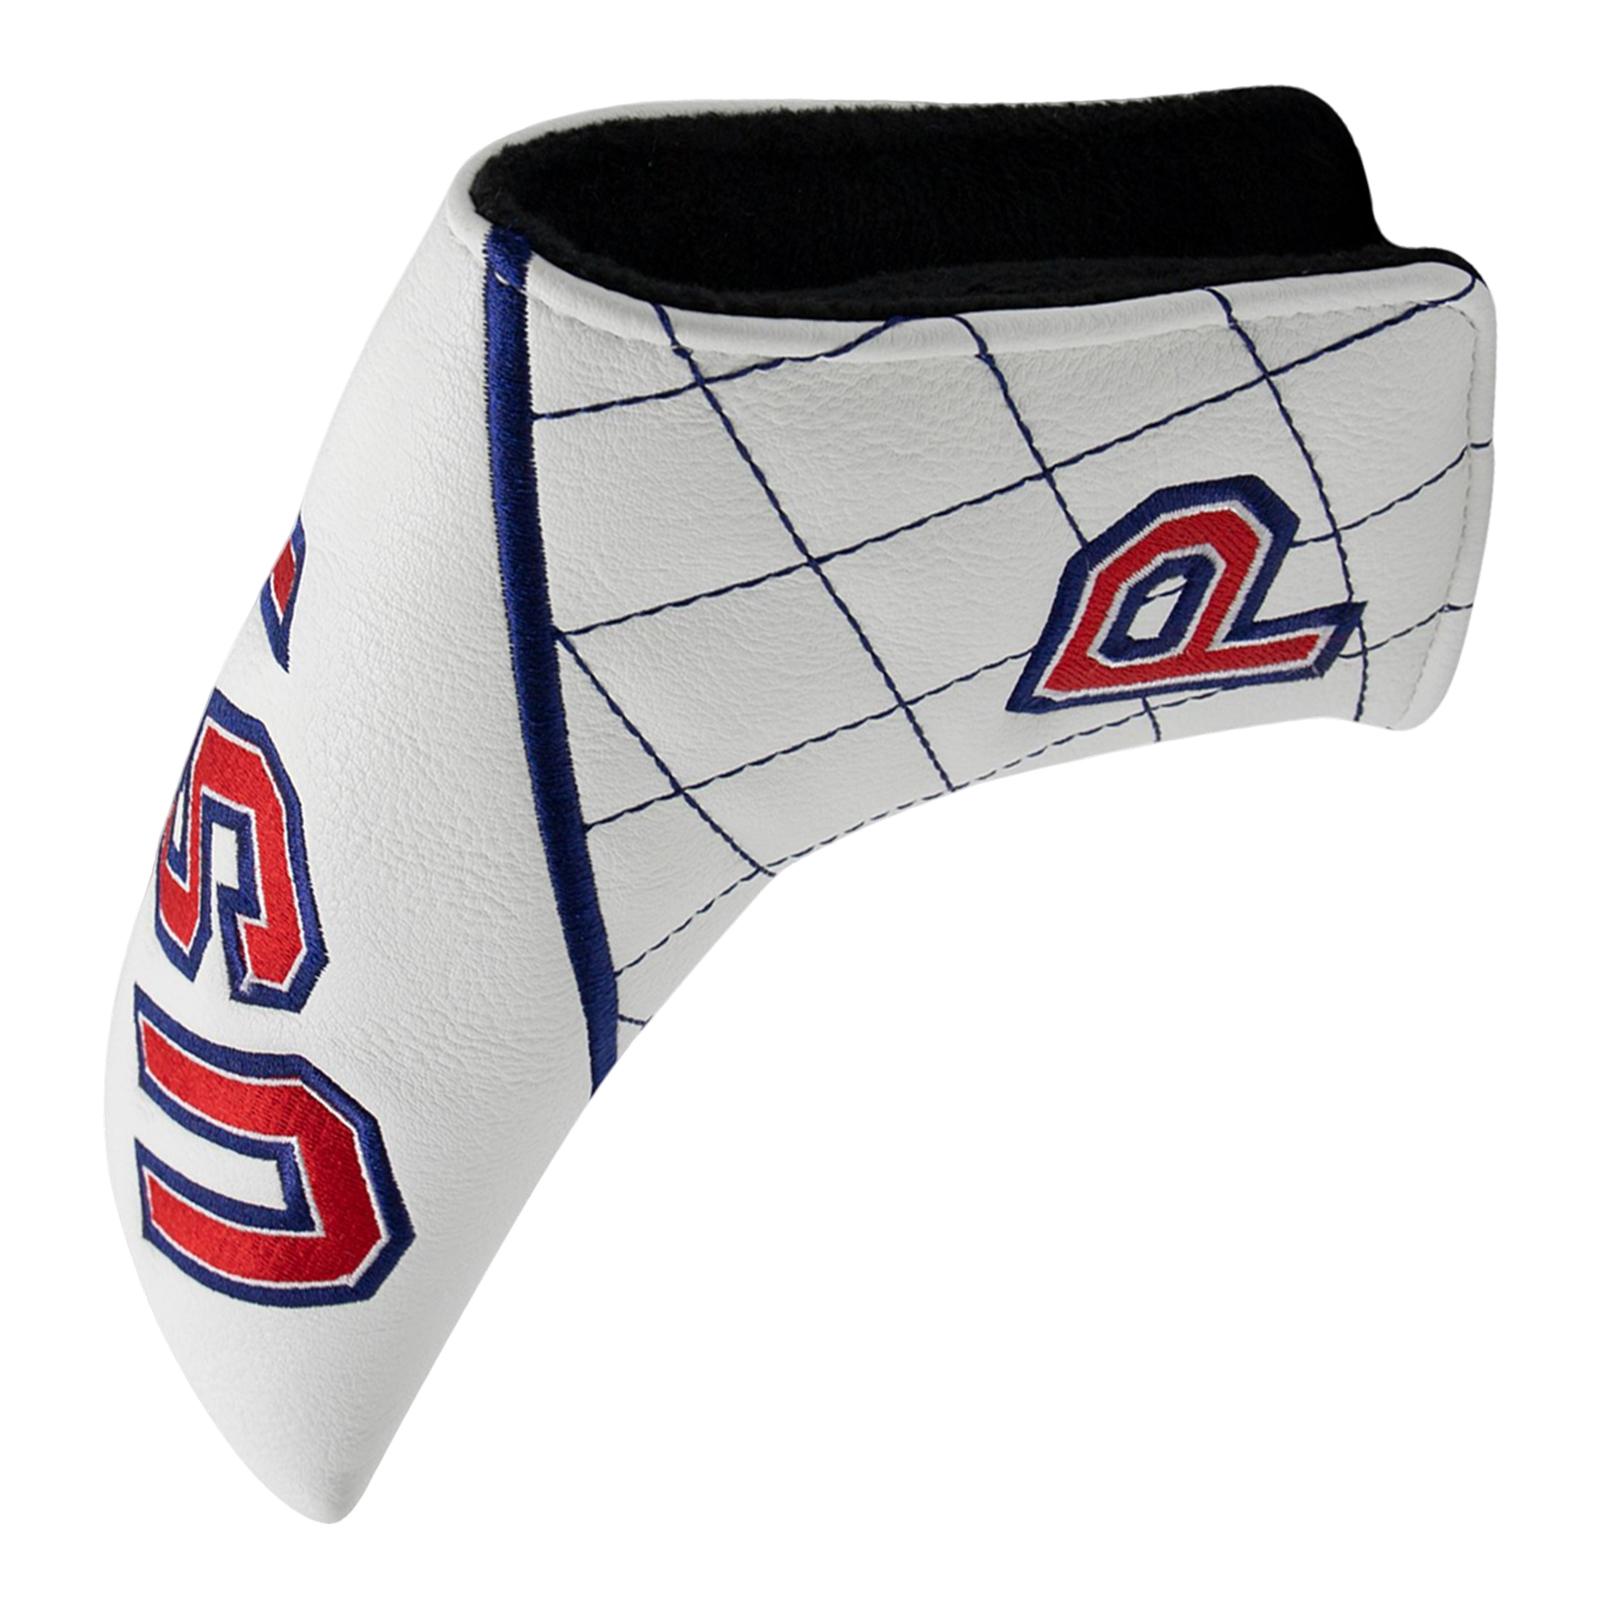 Golf Putter Cover Club Protector PU with Magnetic Waterproof for All Brands